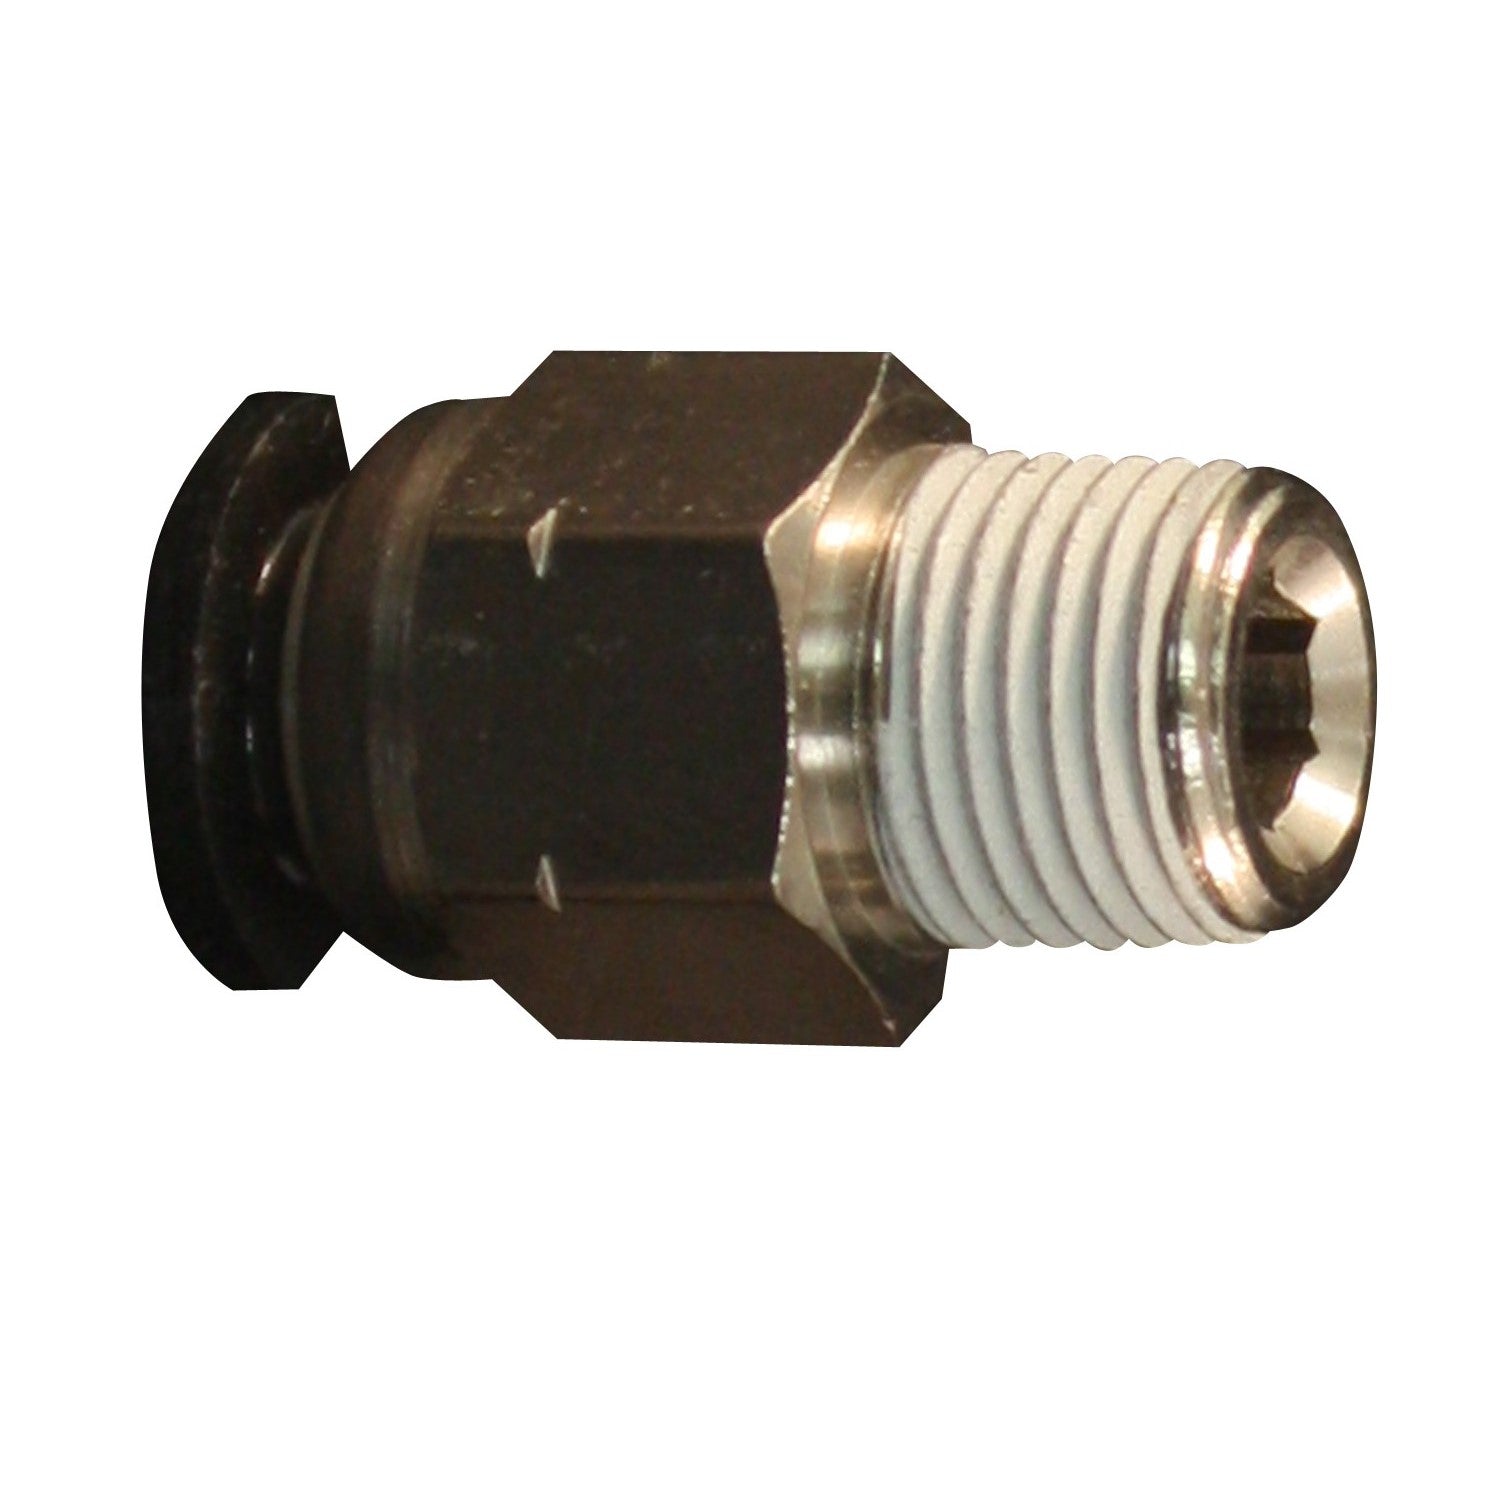 s-2200-10 product